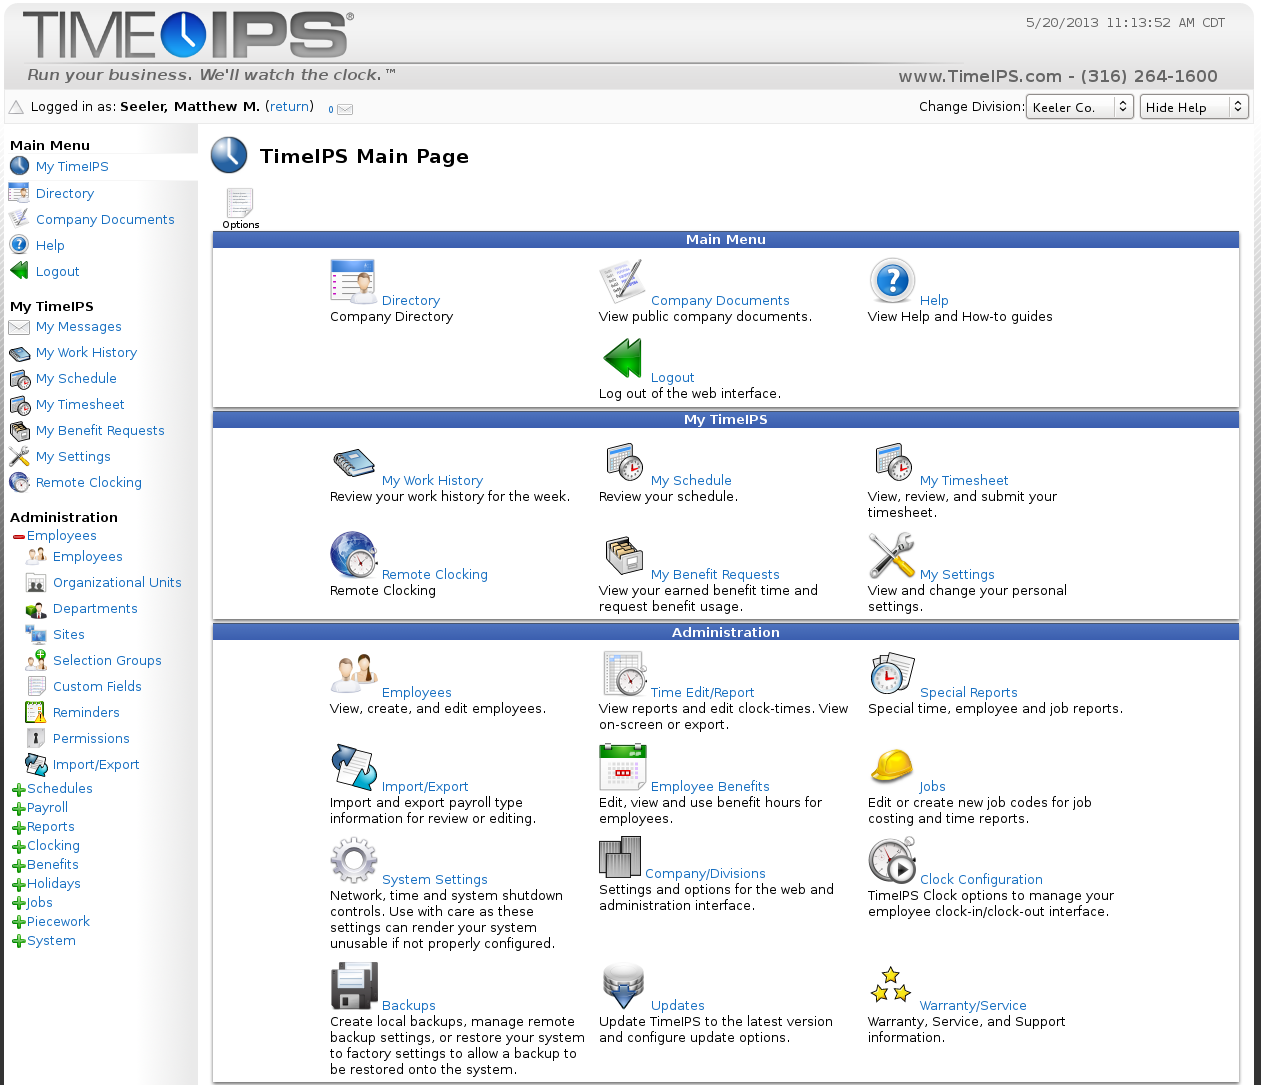 The TimeIPS main page